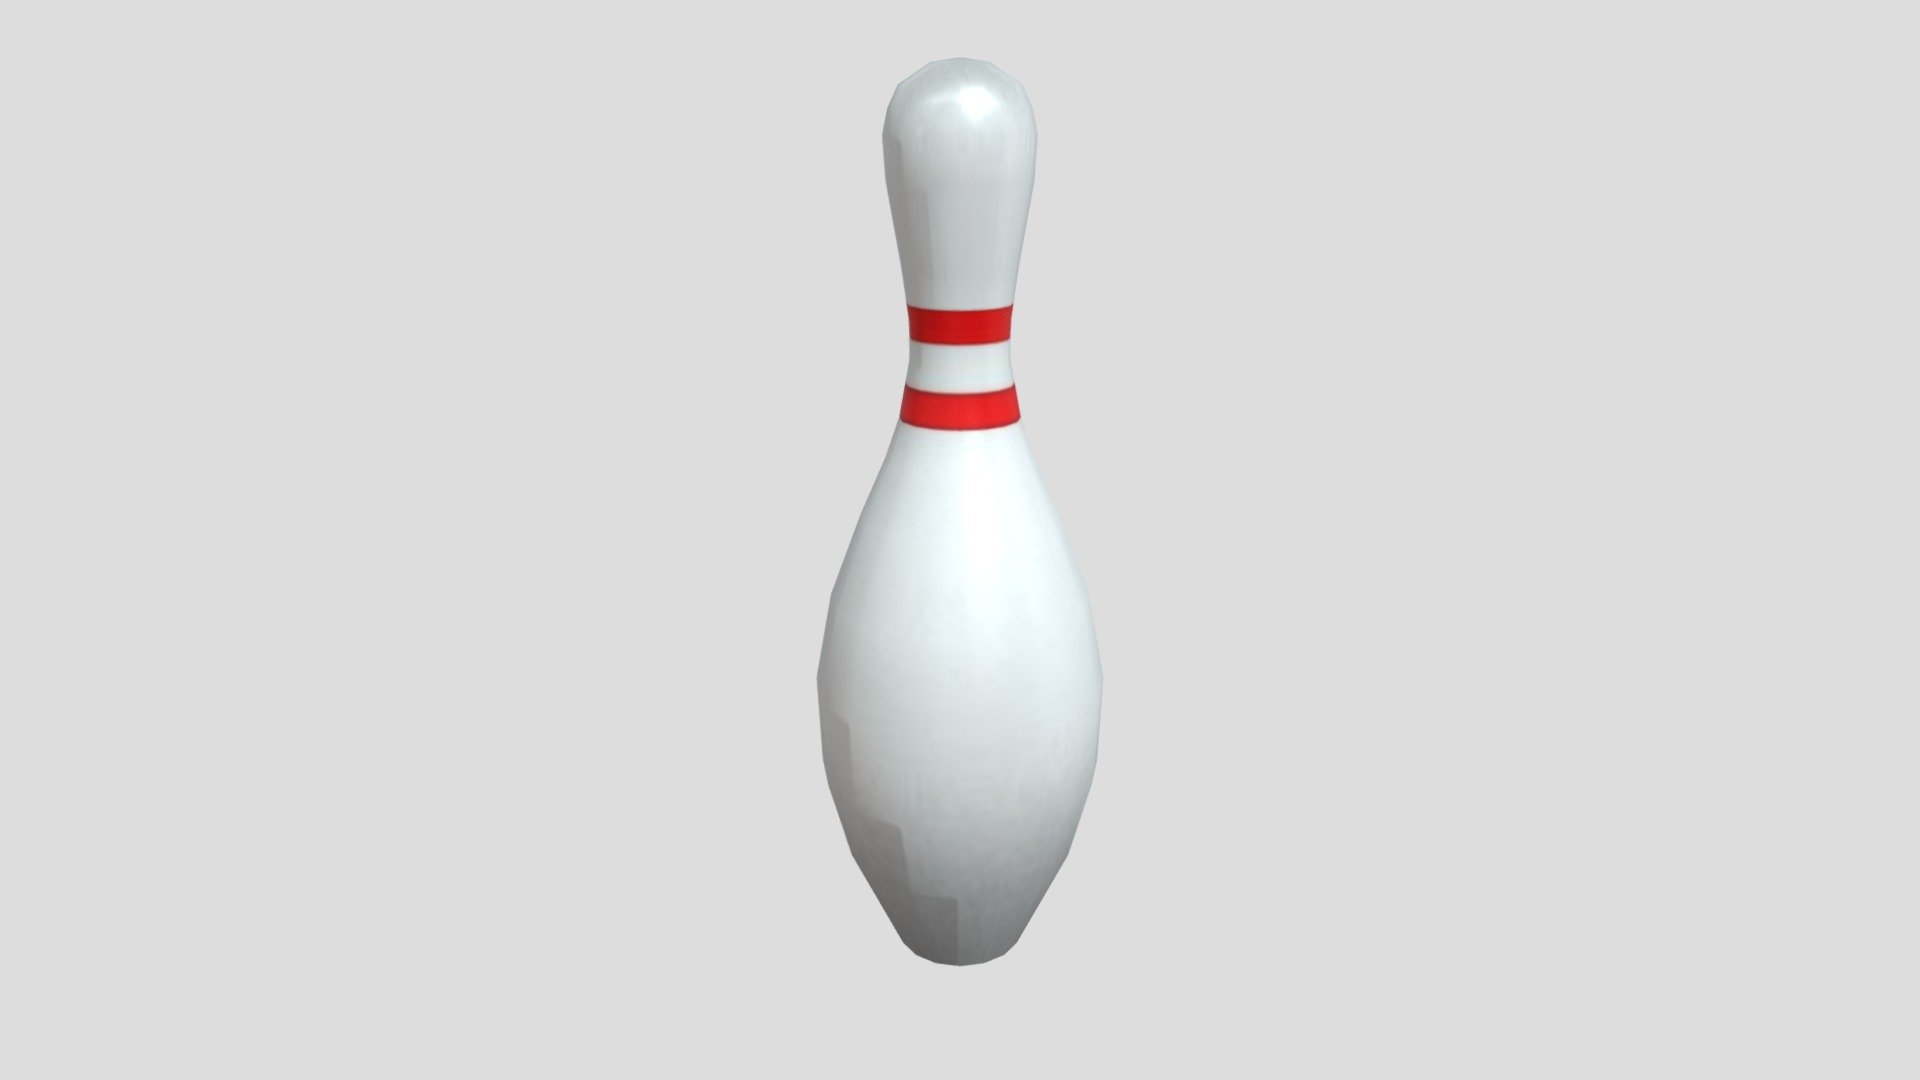 2. Unique Bowling Pin Tattoos - wide 2